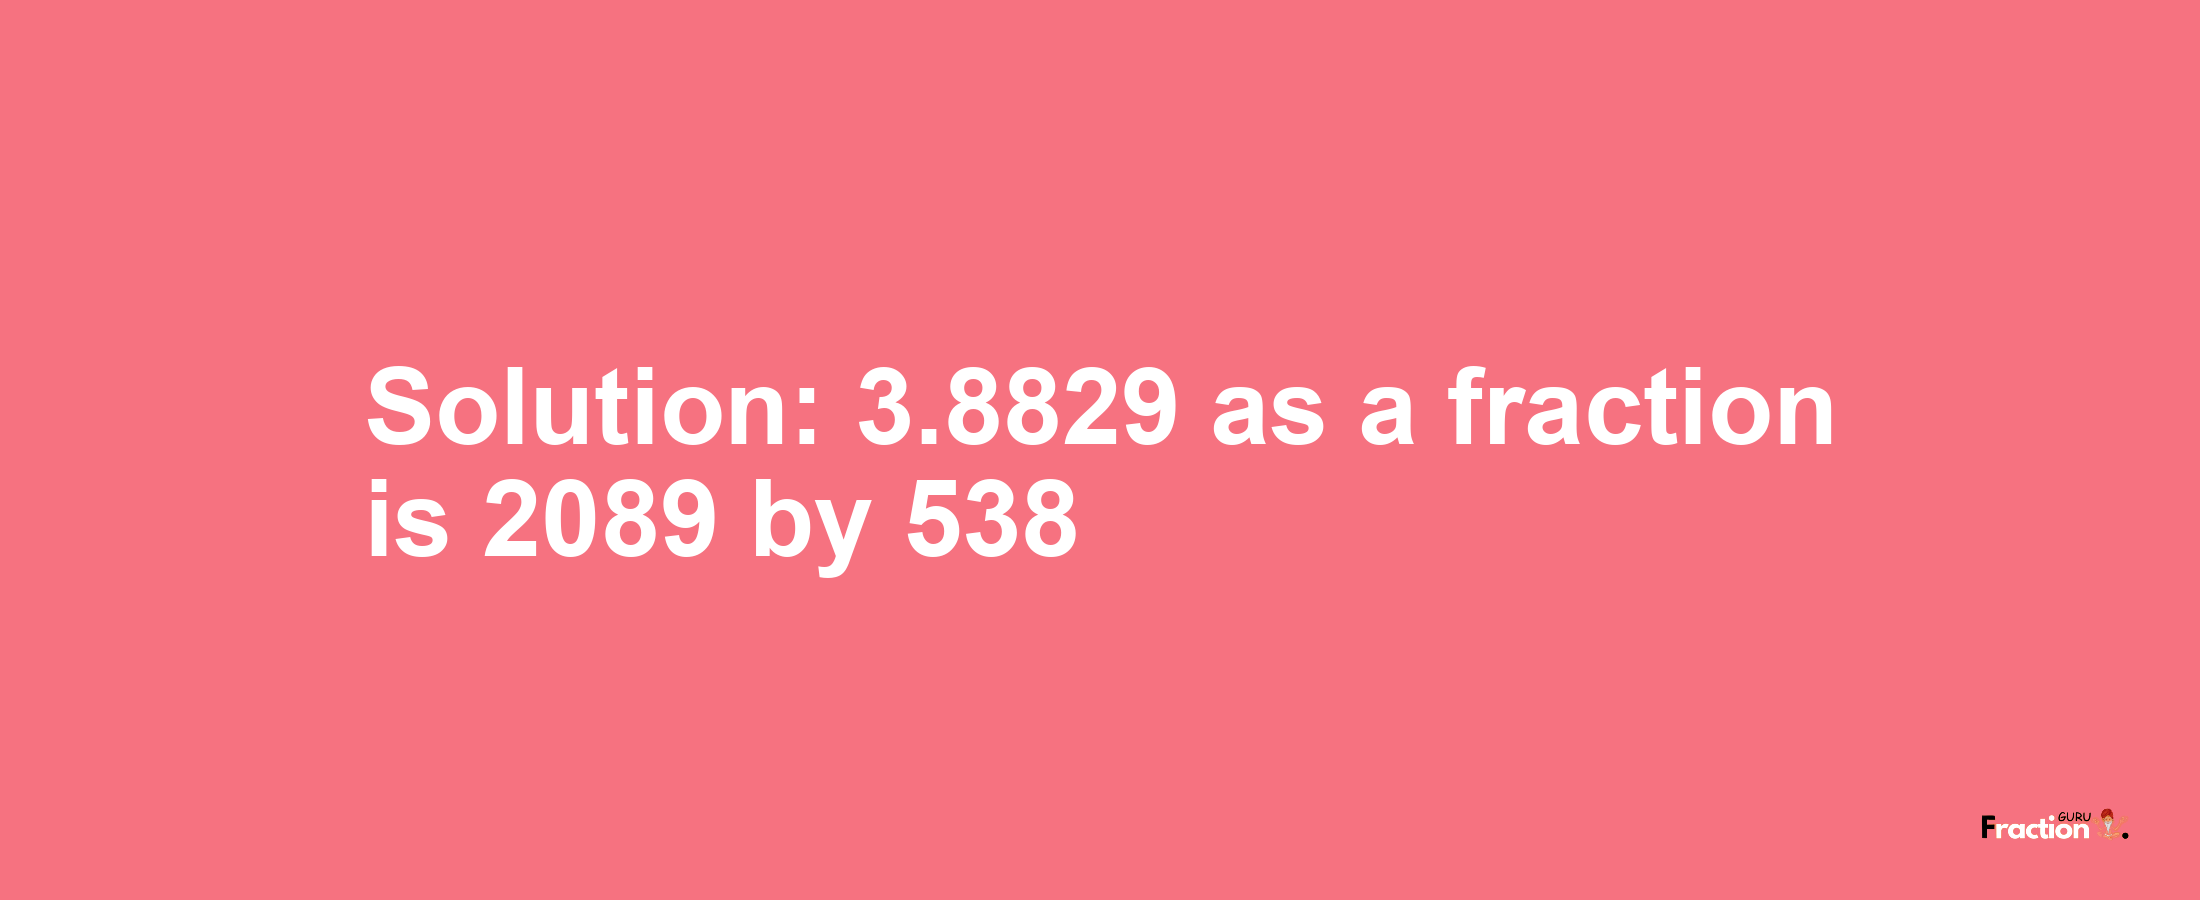 Solution:3.8829 as a fraction is 2089/538